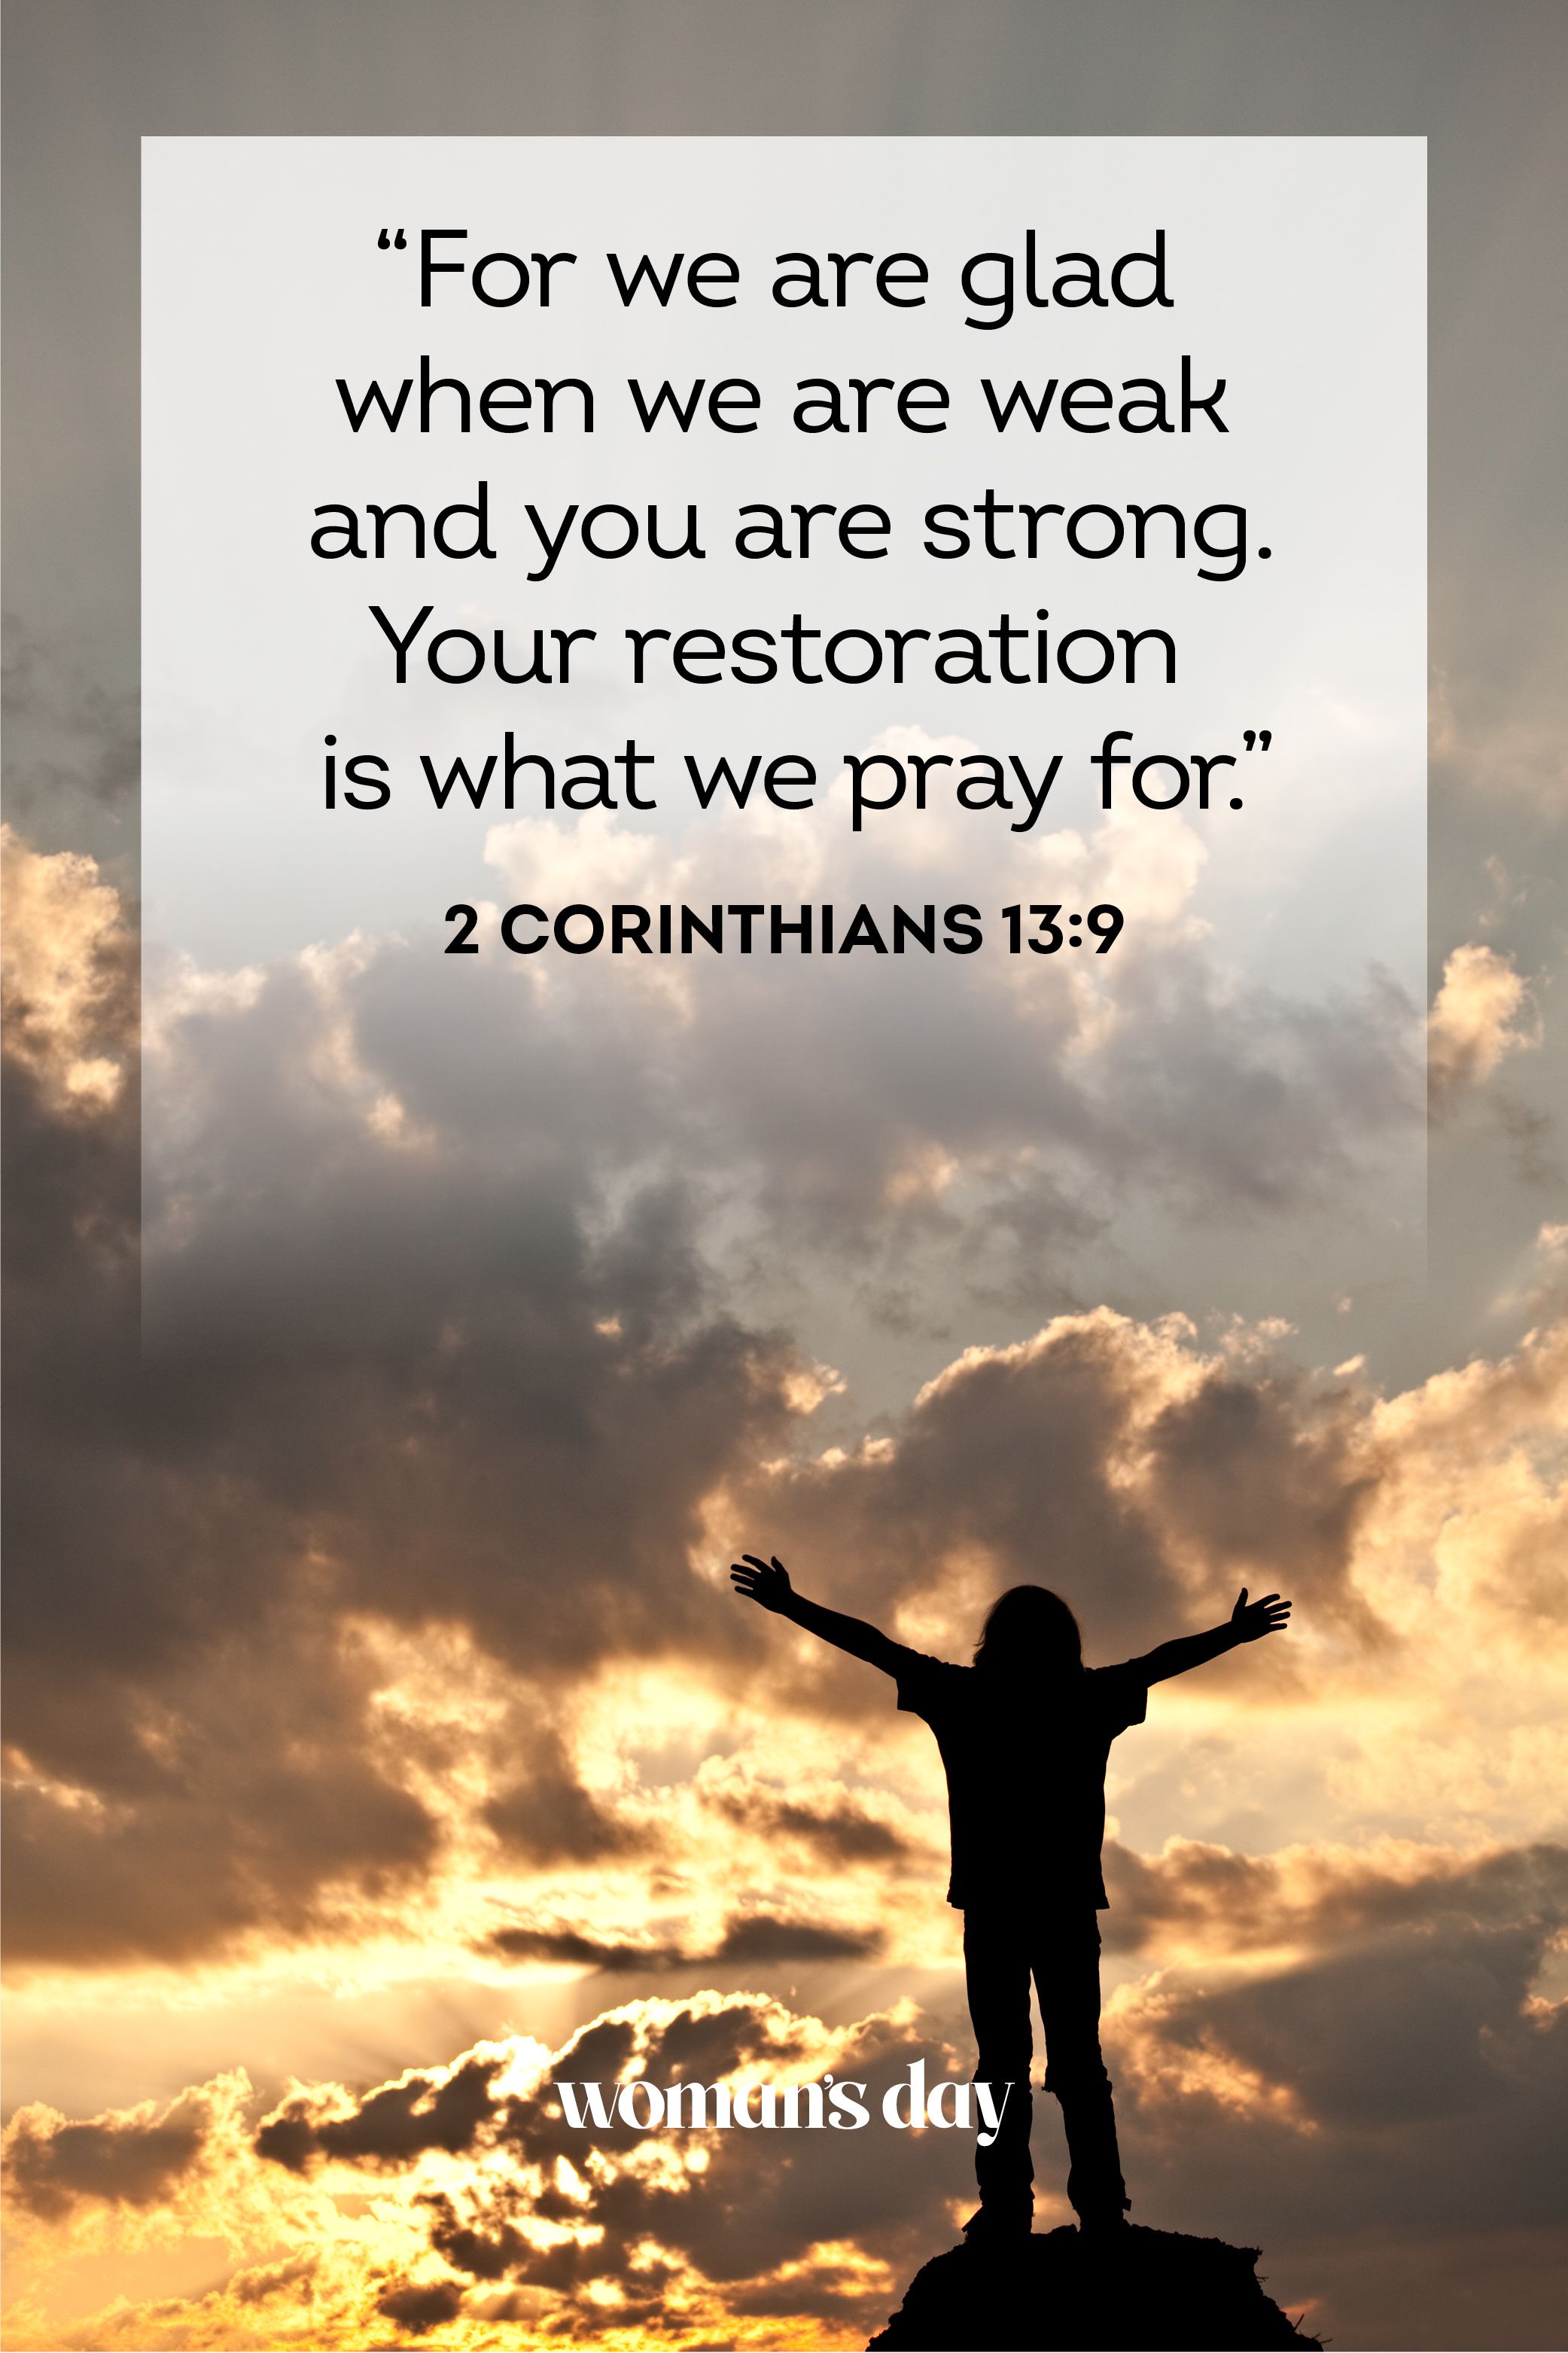 Bible Verses About Strength2 1649359173 